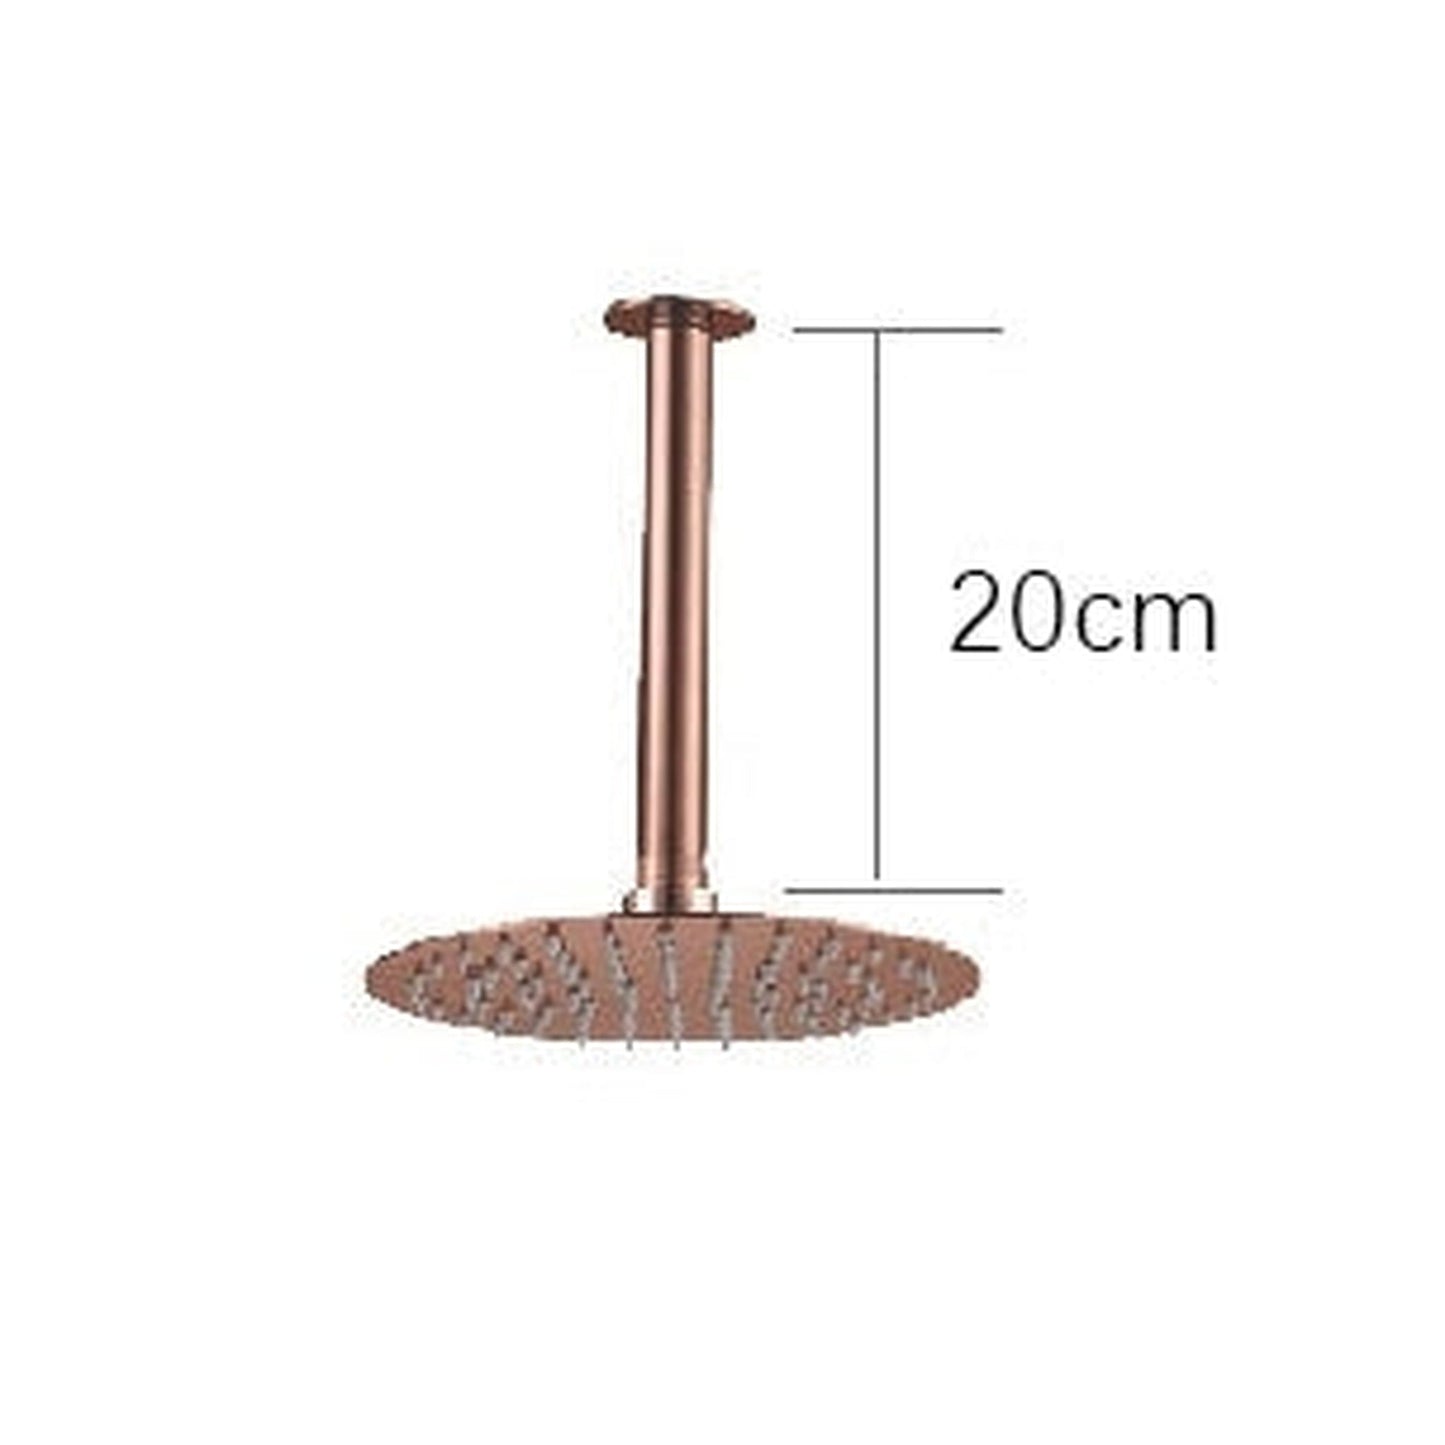 FontanaShowers Verona Creative Luxury Rose Gold Round Ceiling Mounted Solid Brass Shower Head Rainfall Shower System With Dual Mixer and Hand Shower